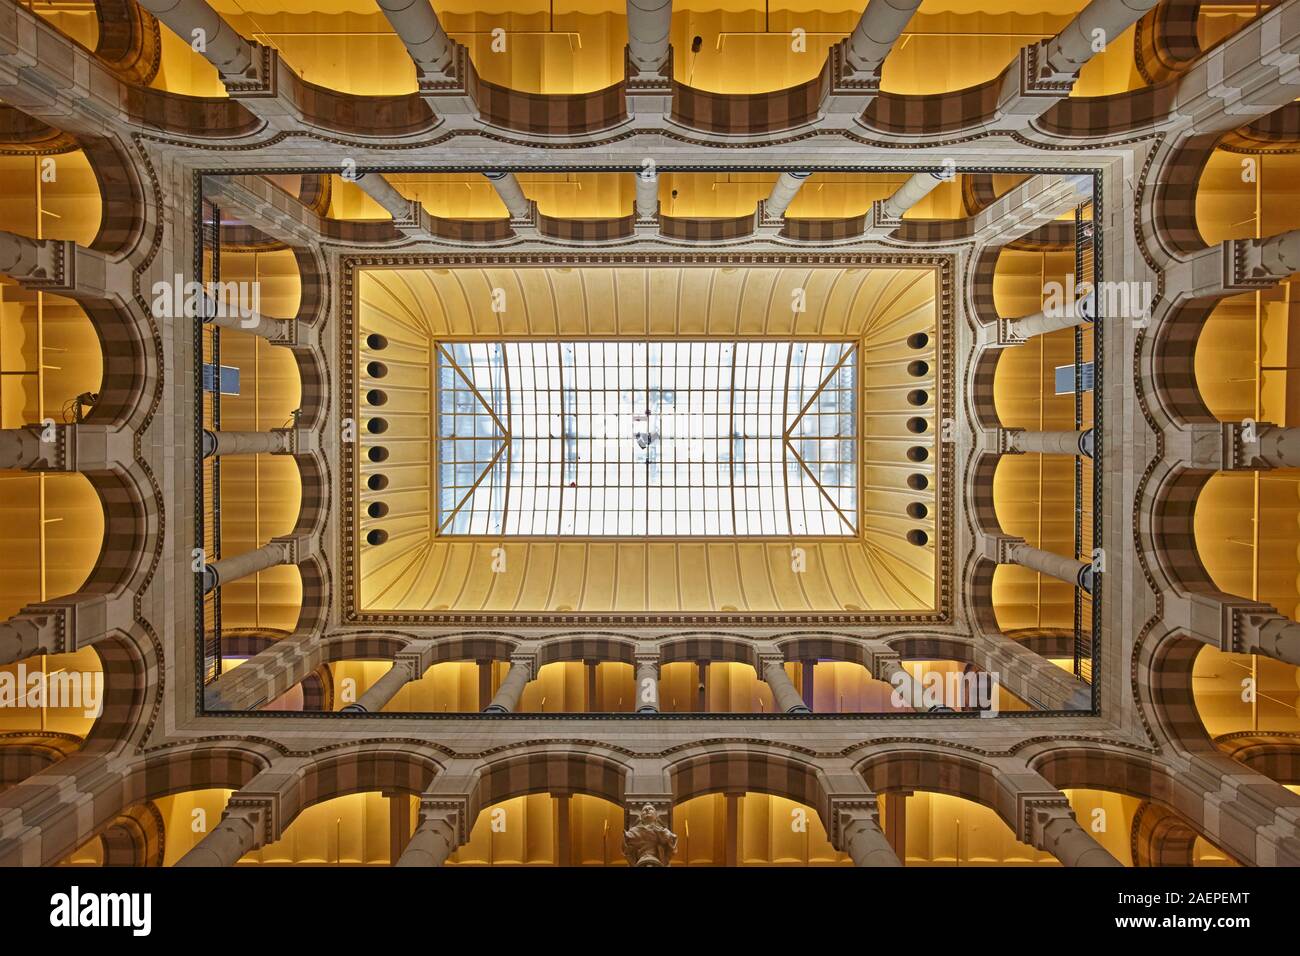 The ceiling of the Magna Plaza shopping mall in Amsterdam, Netherlands Stock Photo